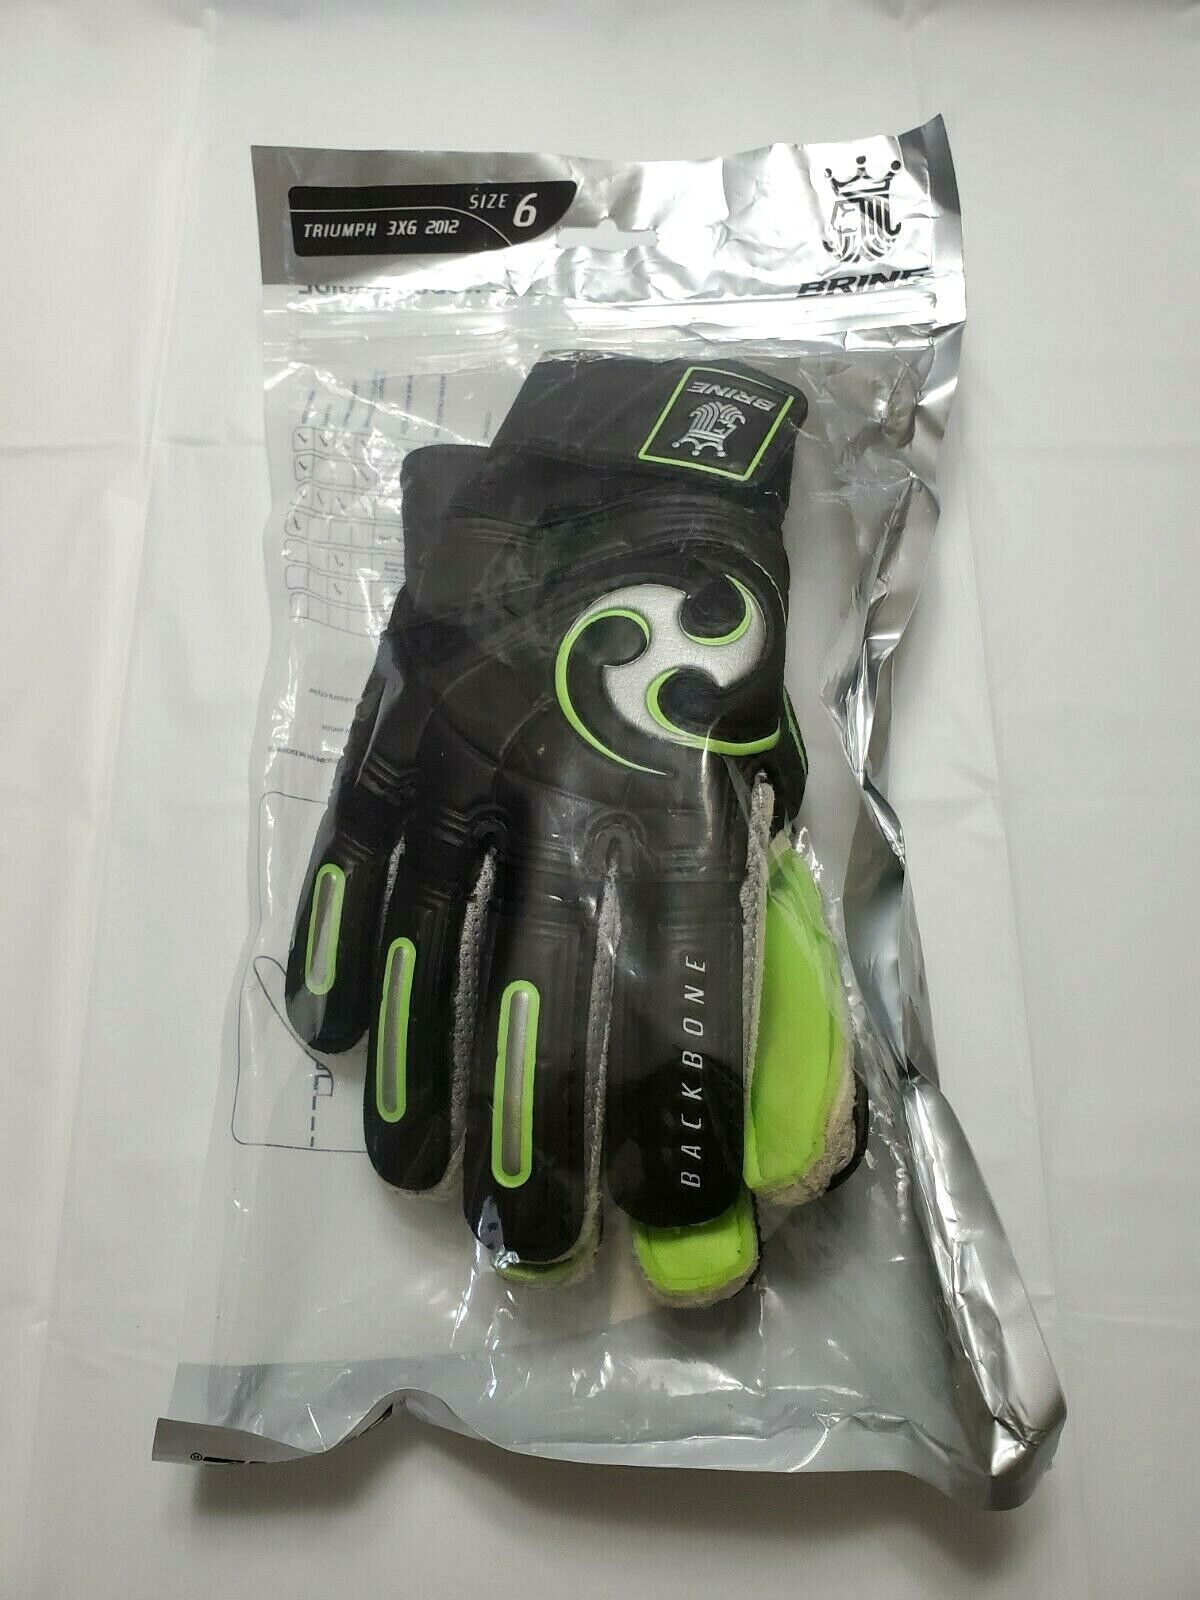 Primary image for BRINE Triumph 3XG Goalkeeping Gloves Size 6 Black Green New